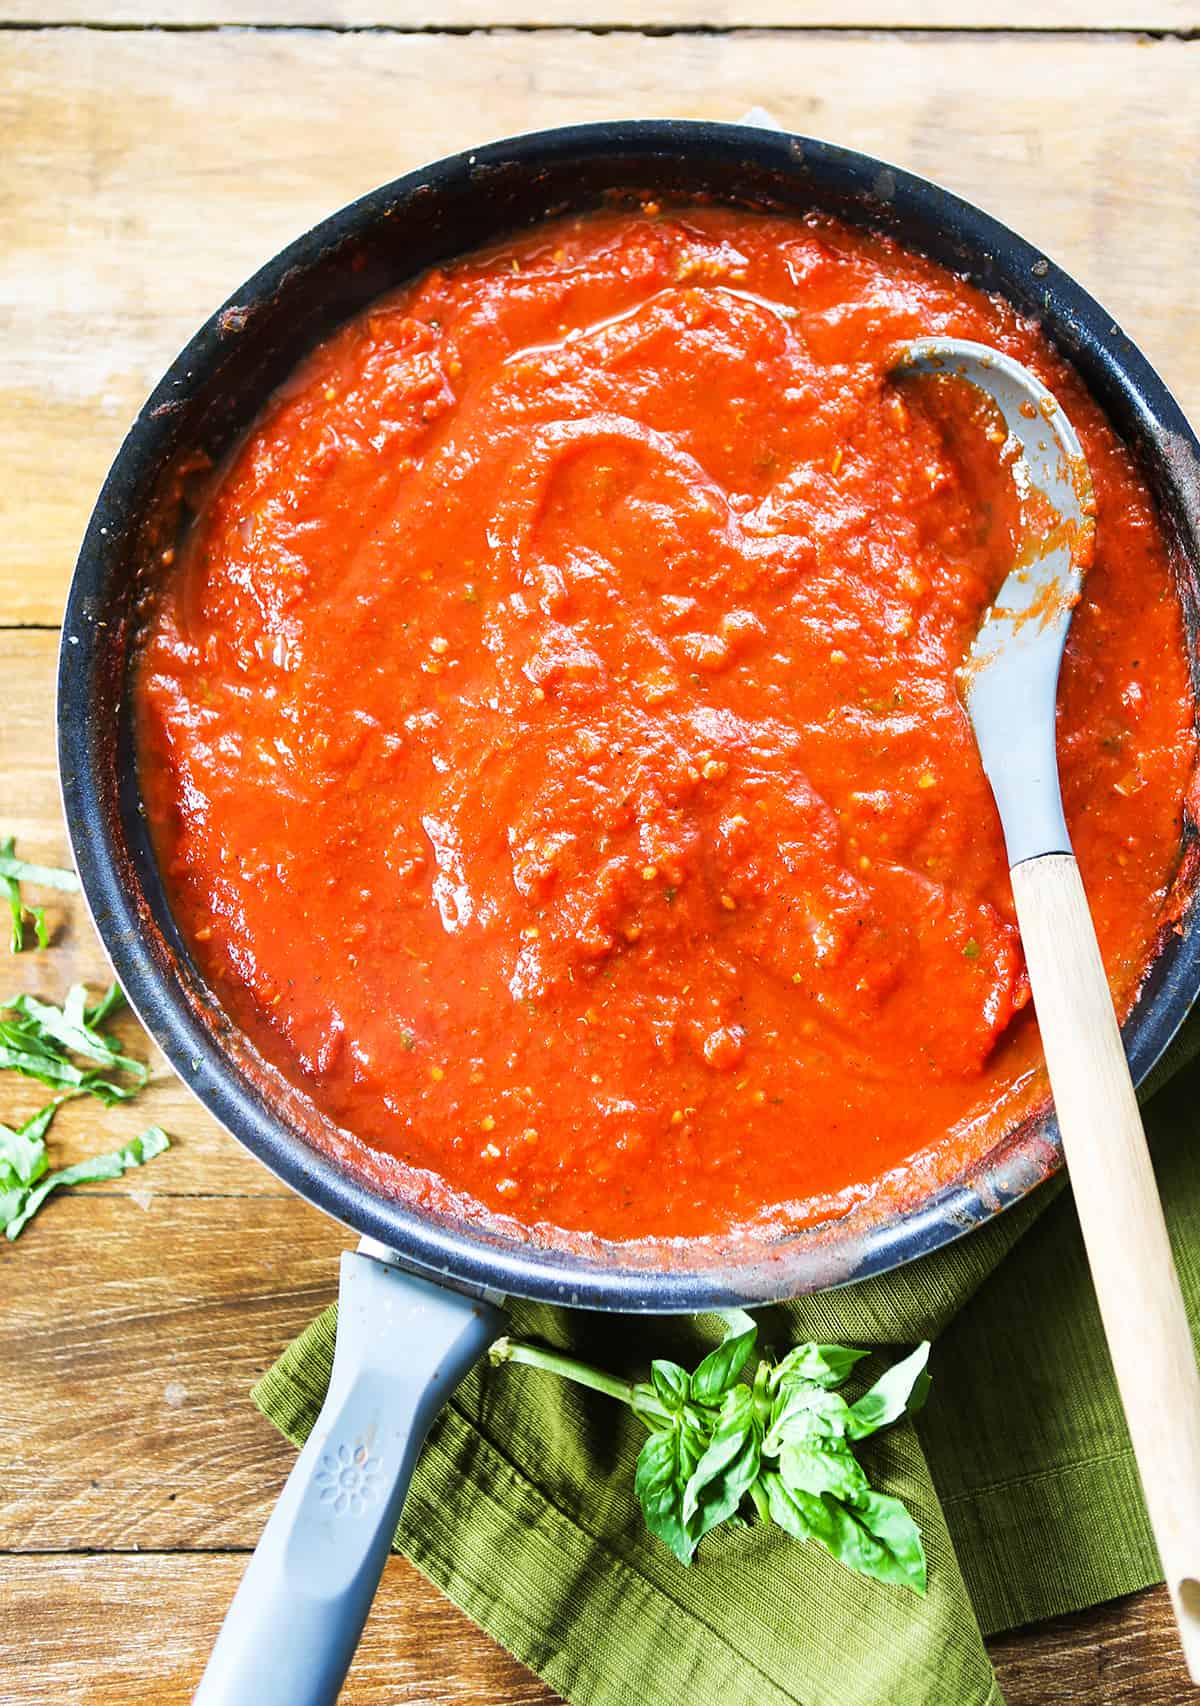 Top view of a skillet filled with marinara sauce and a serving spoon stick into the mixture.